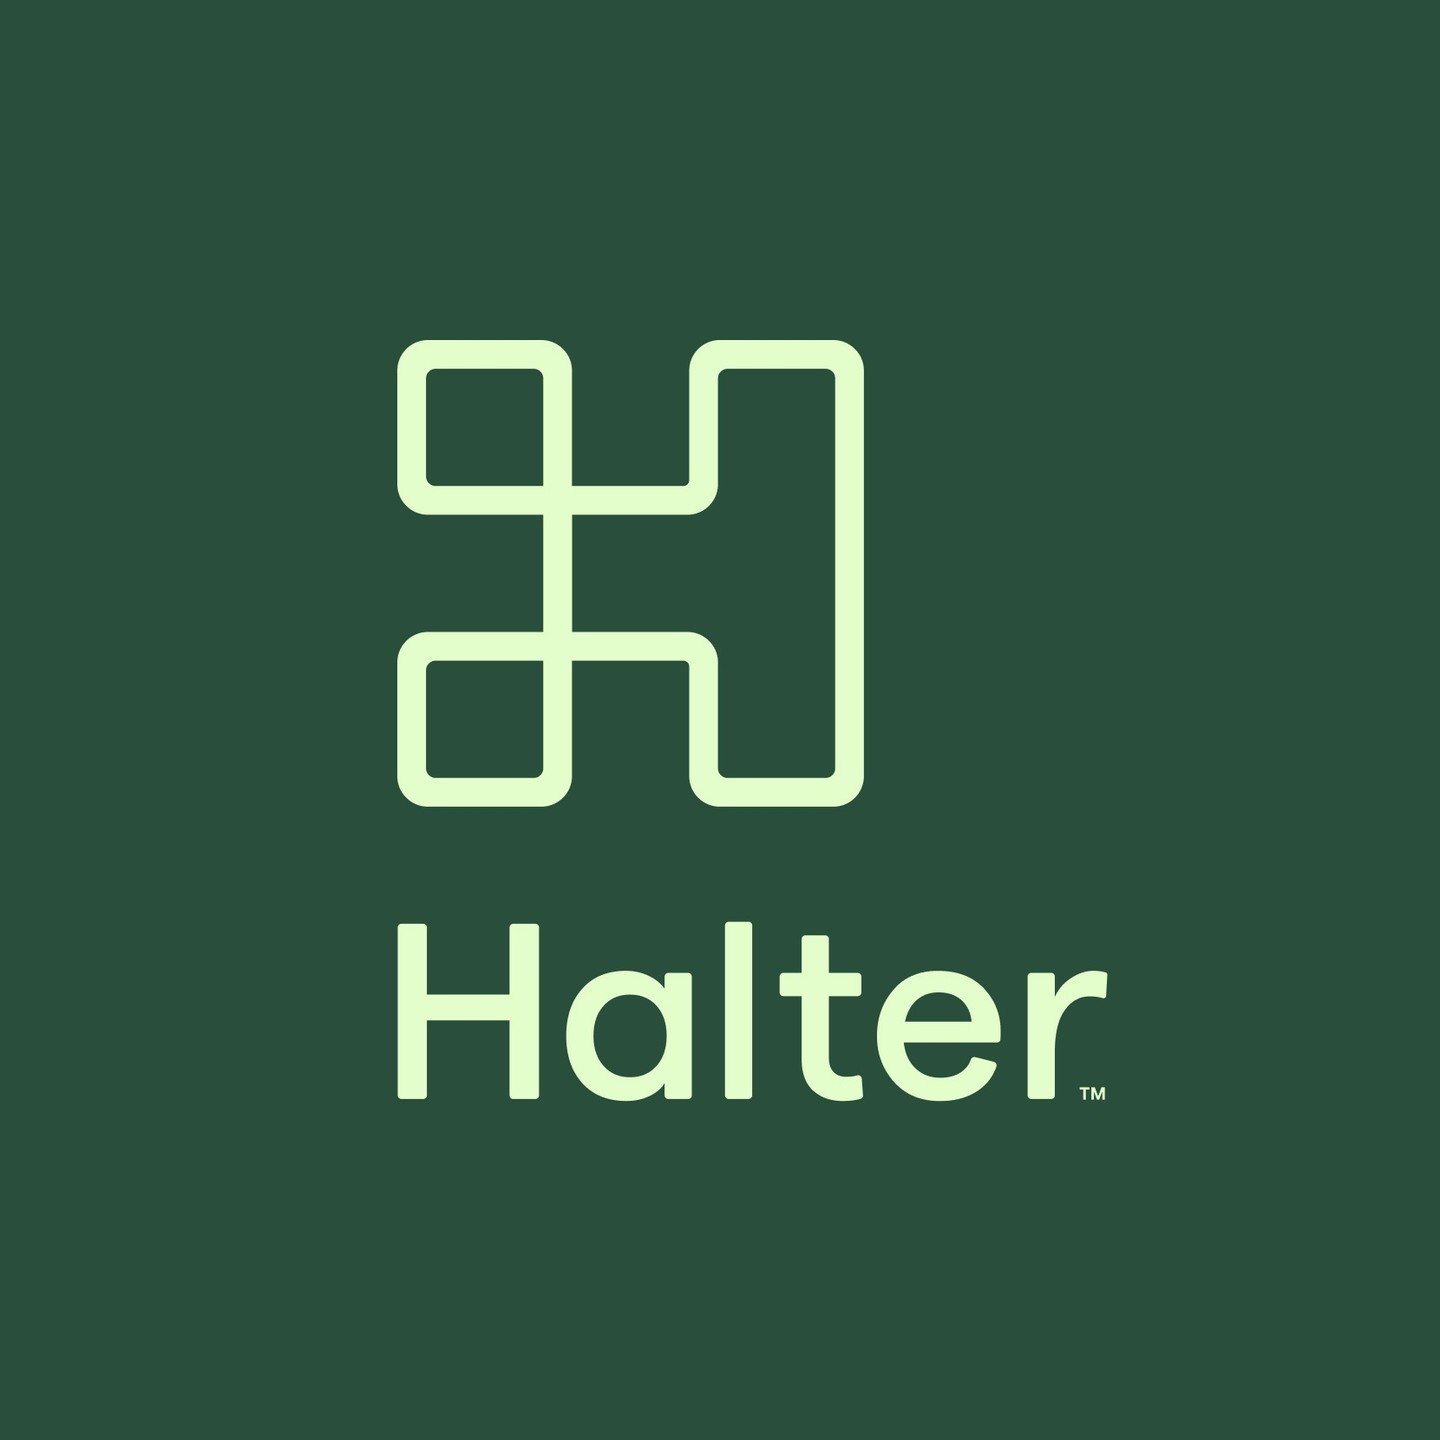 Announcing our first sponsor of the Big Ball @halterhq! 

Like us, Halter share a passion for ensuring that the future of farming in New Zealand is sustainable and profitable. 

Founded in 2016, Halter's world-leading solar powered collars for livest